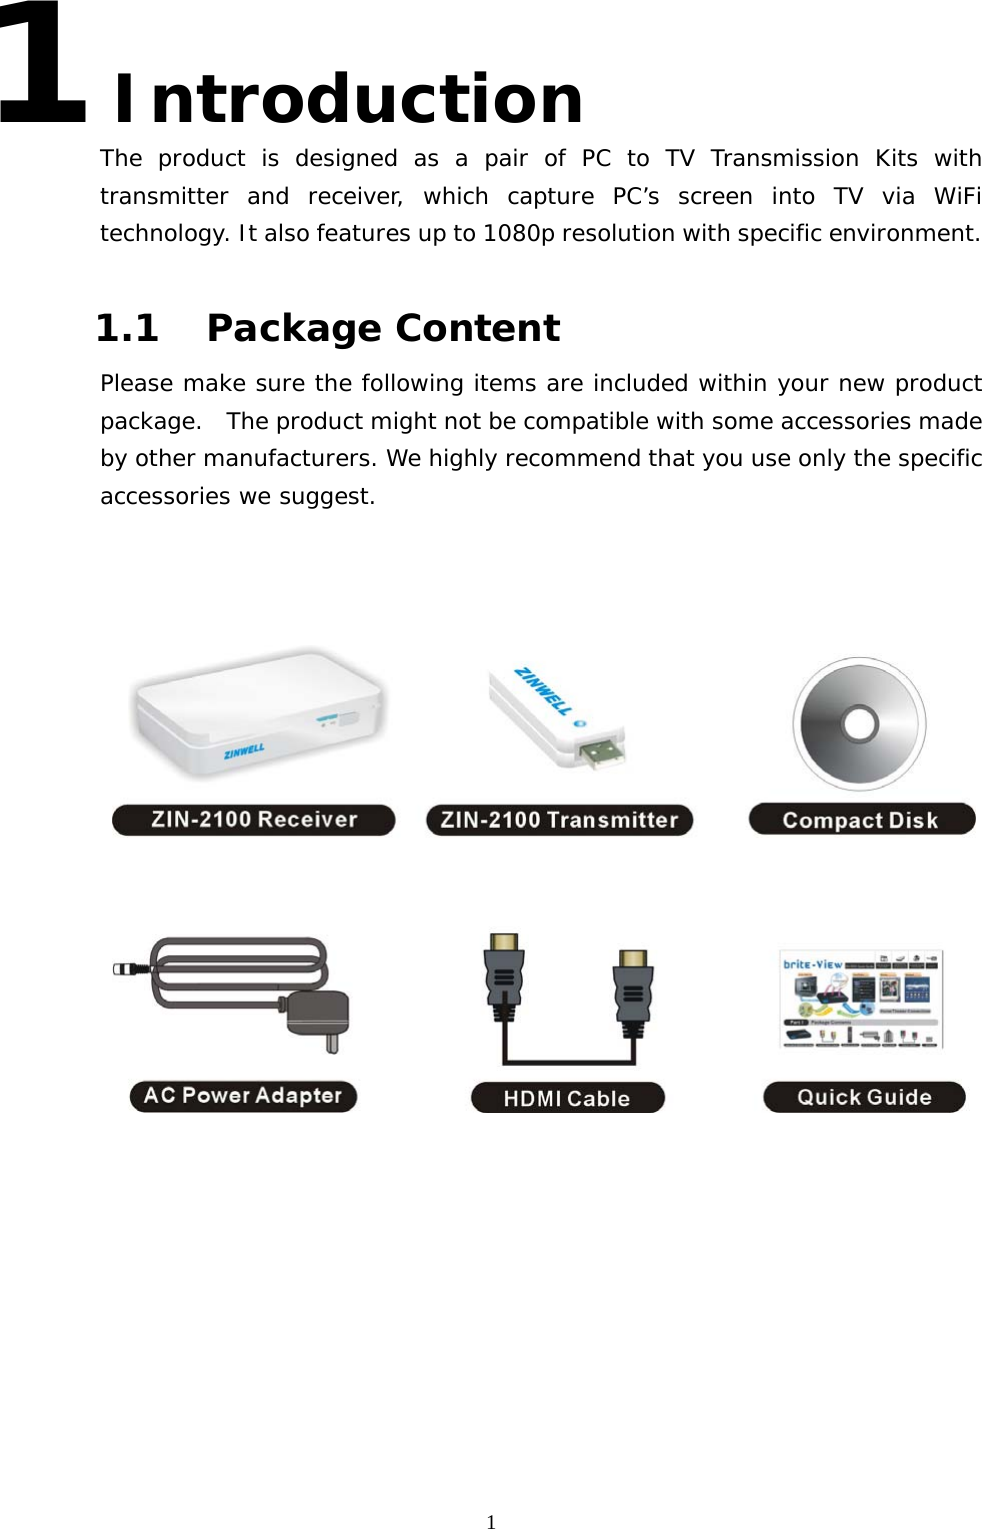   11 Introduction The product is designed as a pair of PC to TV Transmission Kits with transmitter and receiver, which capture PC’s screen into TV via WiFi technology. It also features up to 1080p resolution with specific environment.  1.1 Package Content Please make sure the following items are included within your new product package.   The product might not be compatible with some accessories made by other manufacturers. We highly recommend that you use only the specific accessories we suggest.   